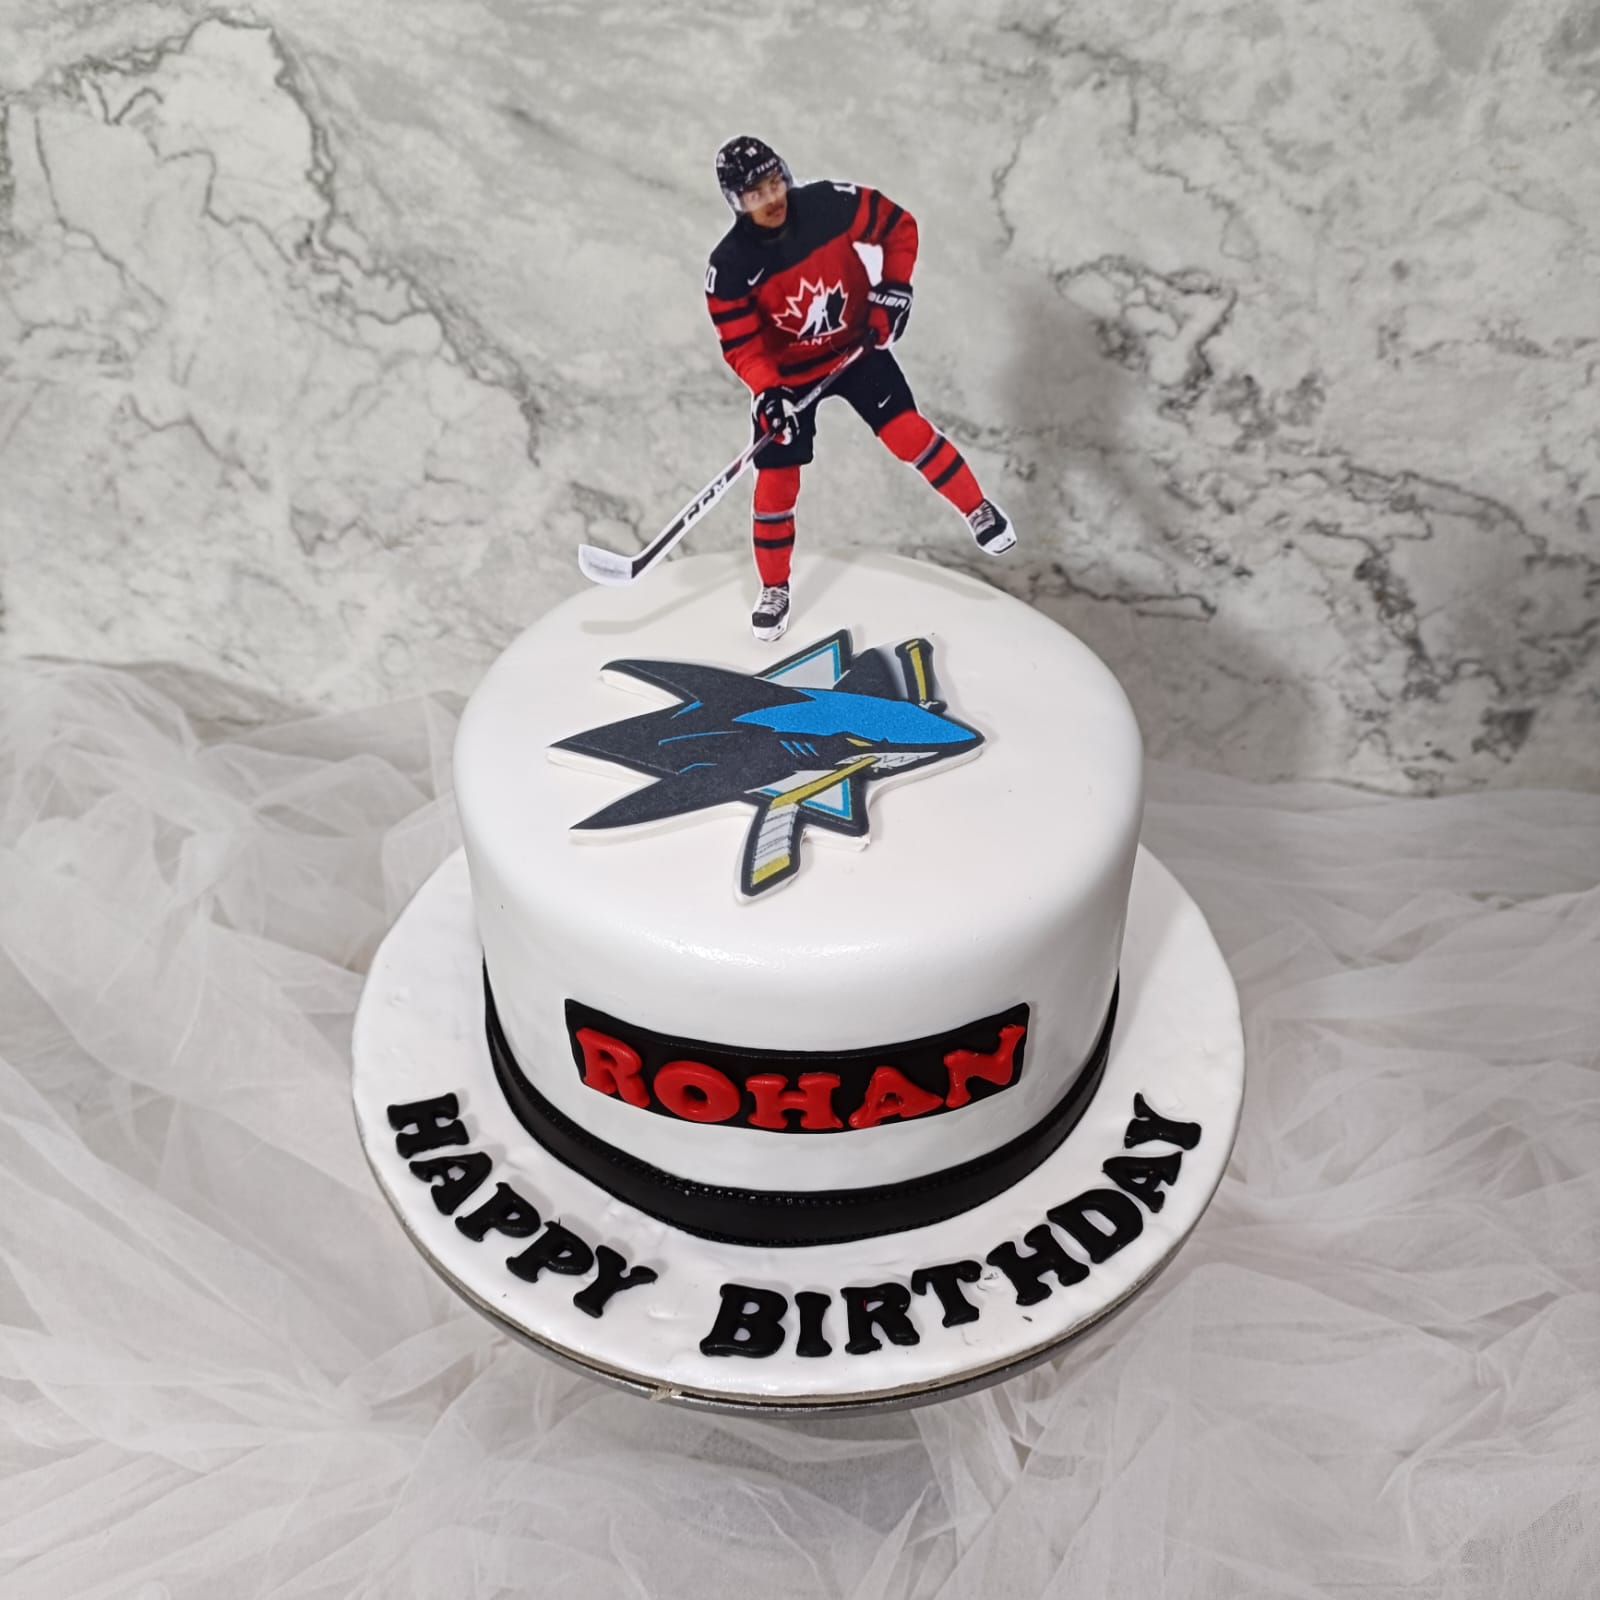 The best hockey-themed cakes for your birthday! Yummy!